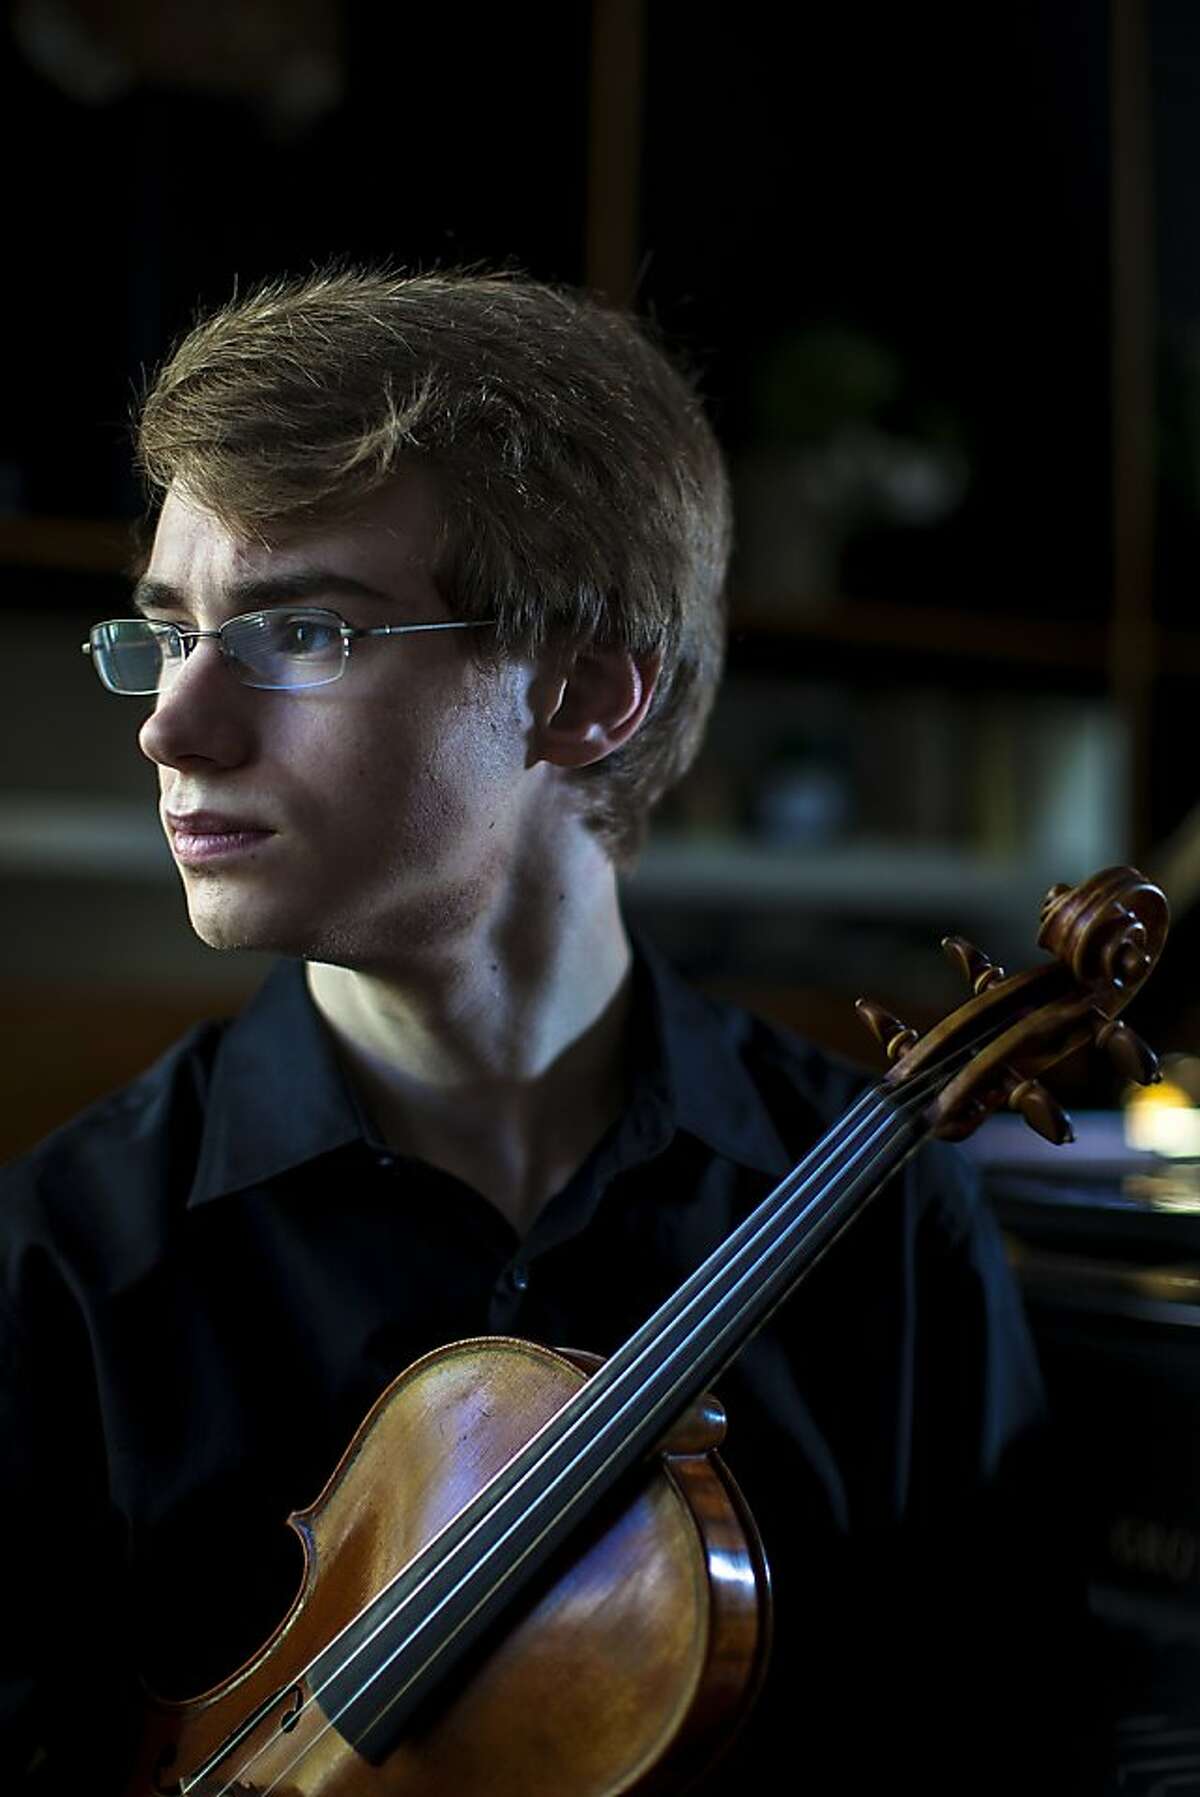 18 year-old violinist Kenneth Renshaw sits for a portrait at home in San Francisco, Calif. on Thursday, May 24, 2012. Renshaw, who has been playing violin since the age of 4, has won first prize in the senior division of the prestigious Menuhin Competition in Beijing this April. The former concertmaster of the San Francisco Symphony Youth Orchestra has also recently graduated from The Ruth Asawa San Francisco School of the Arts and is planning to attend the New England Conservatory of Music in Boston this fall.